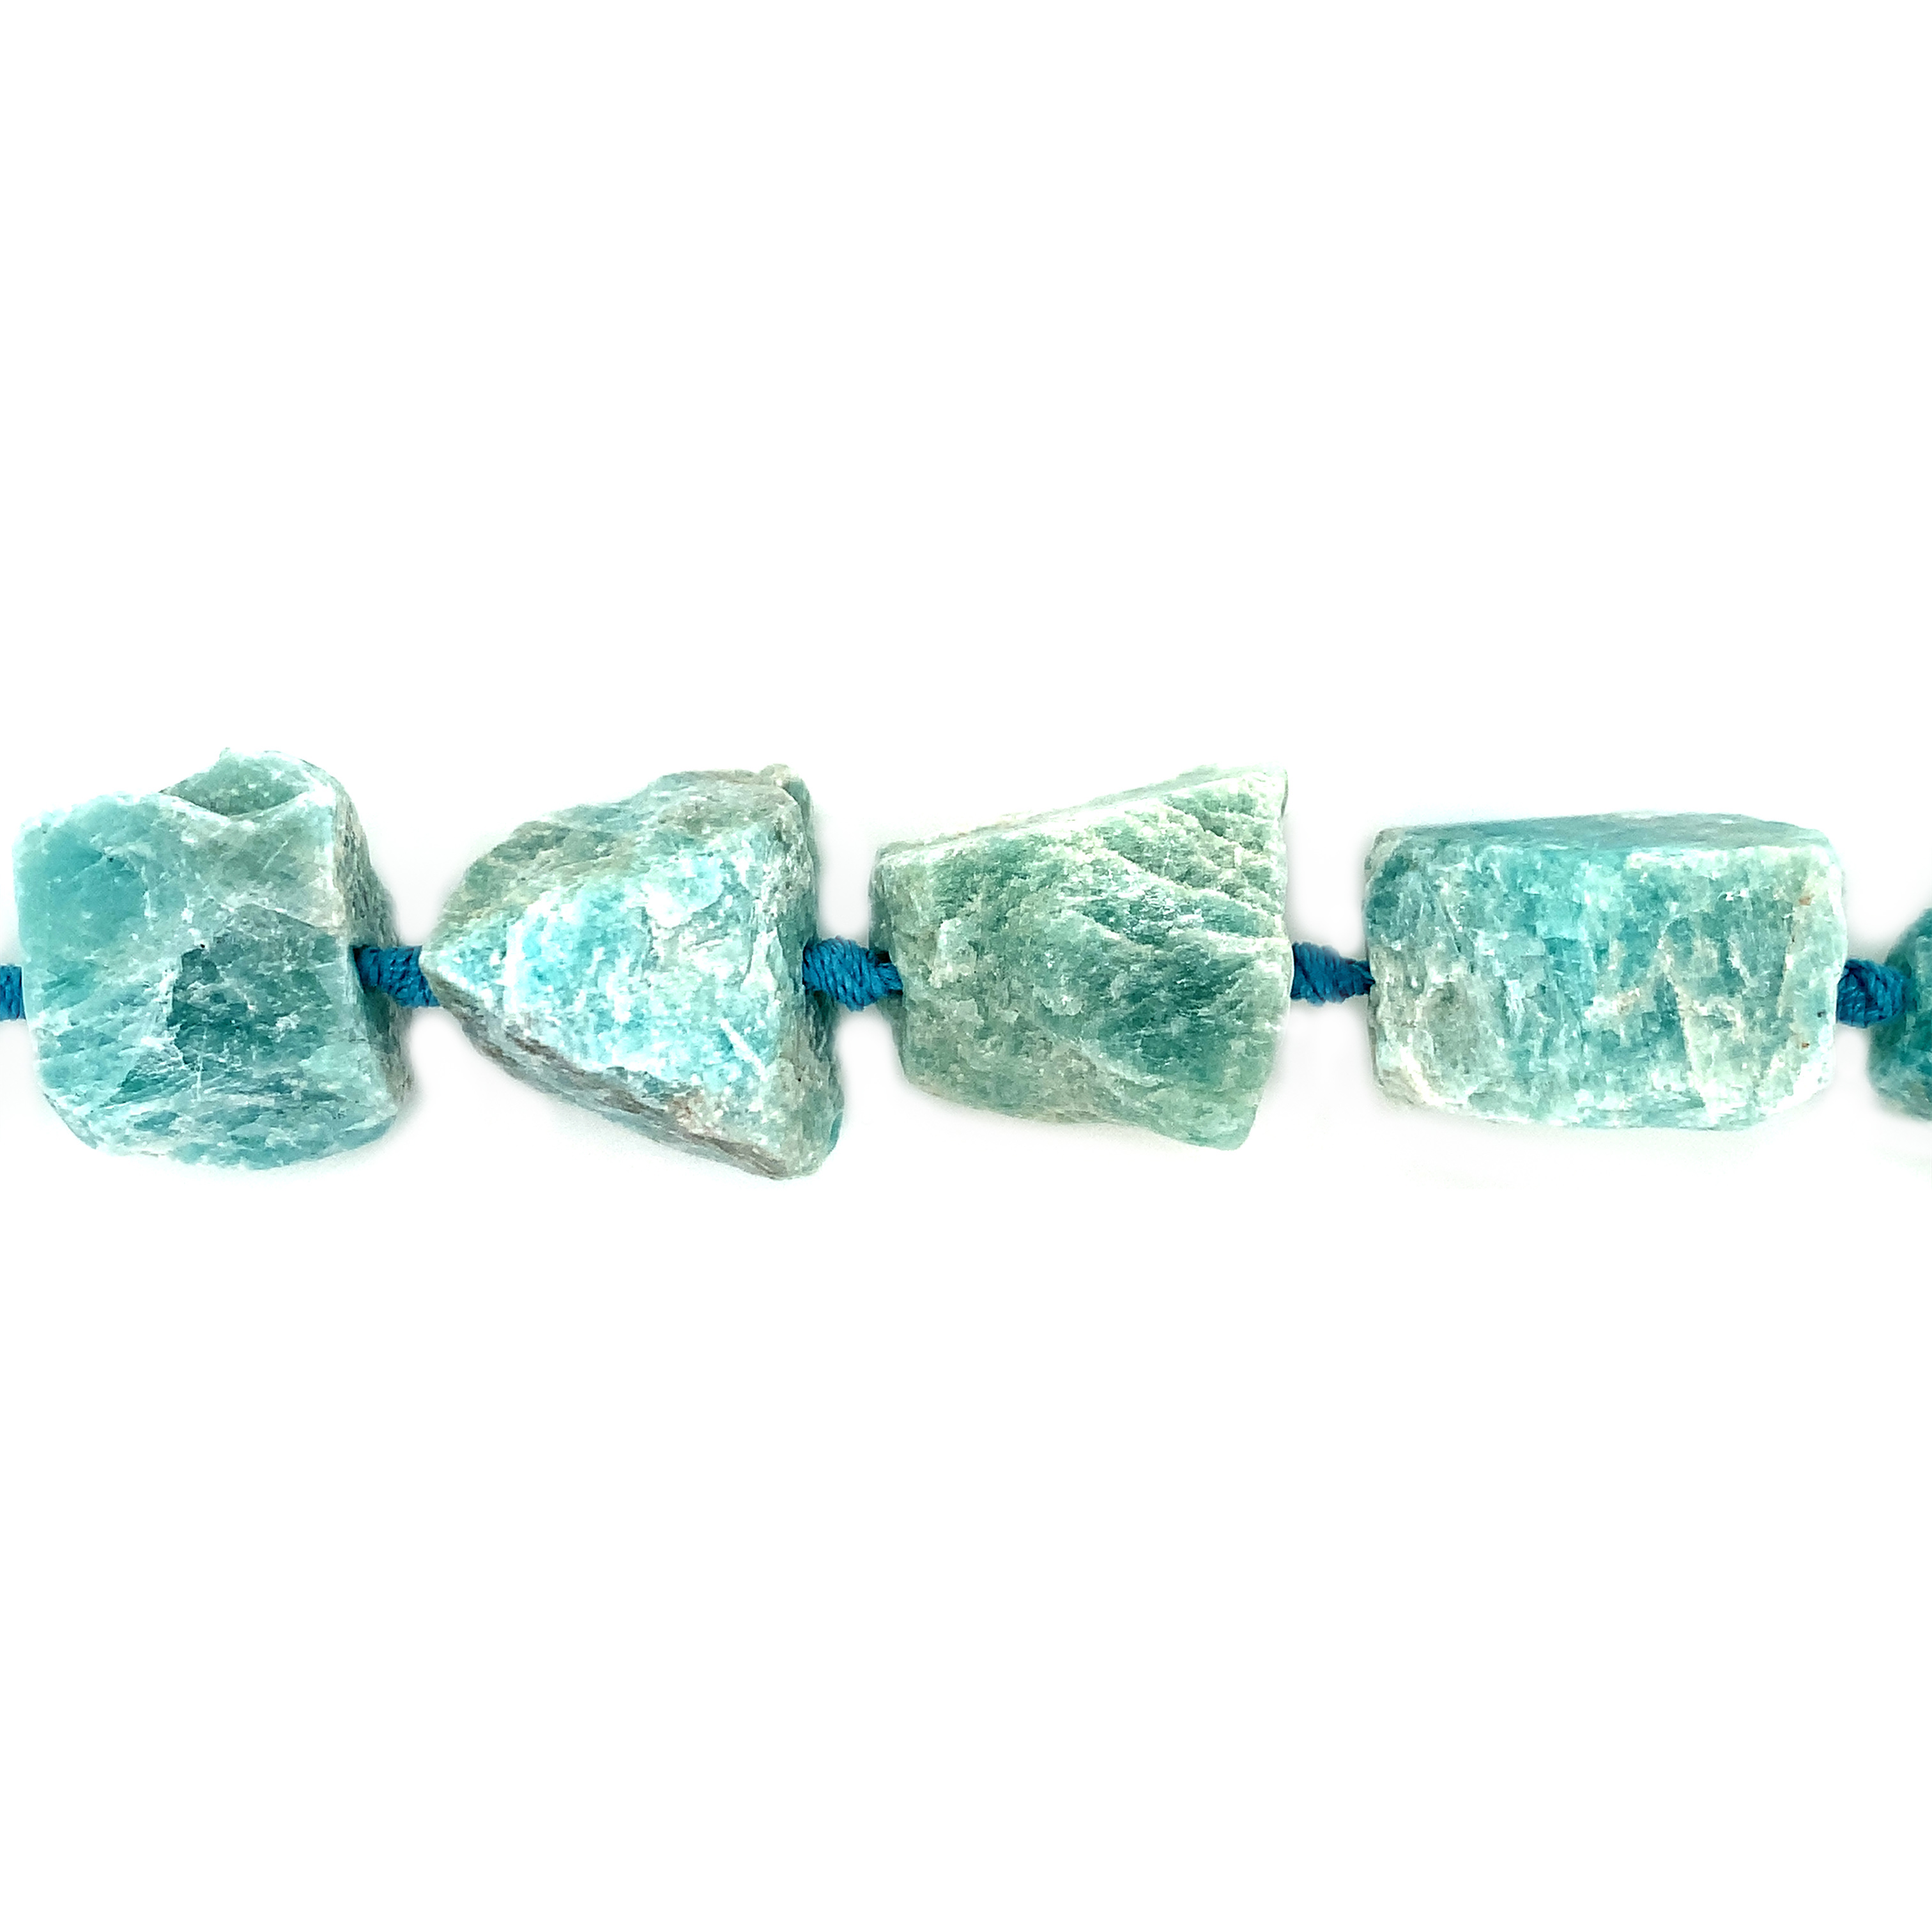 20-25mm Amazonite Rough Nuggets